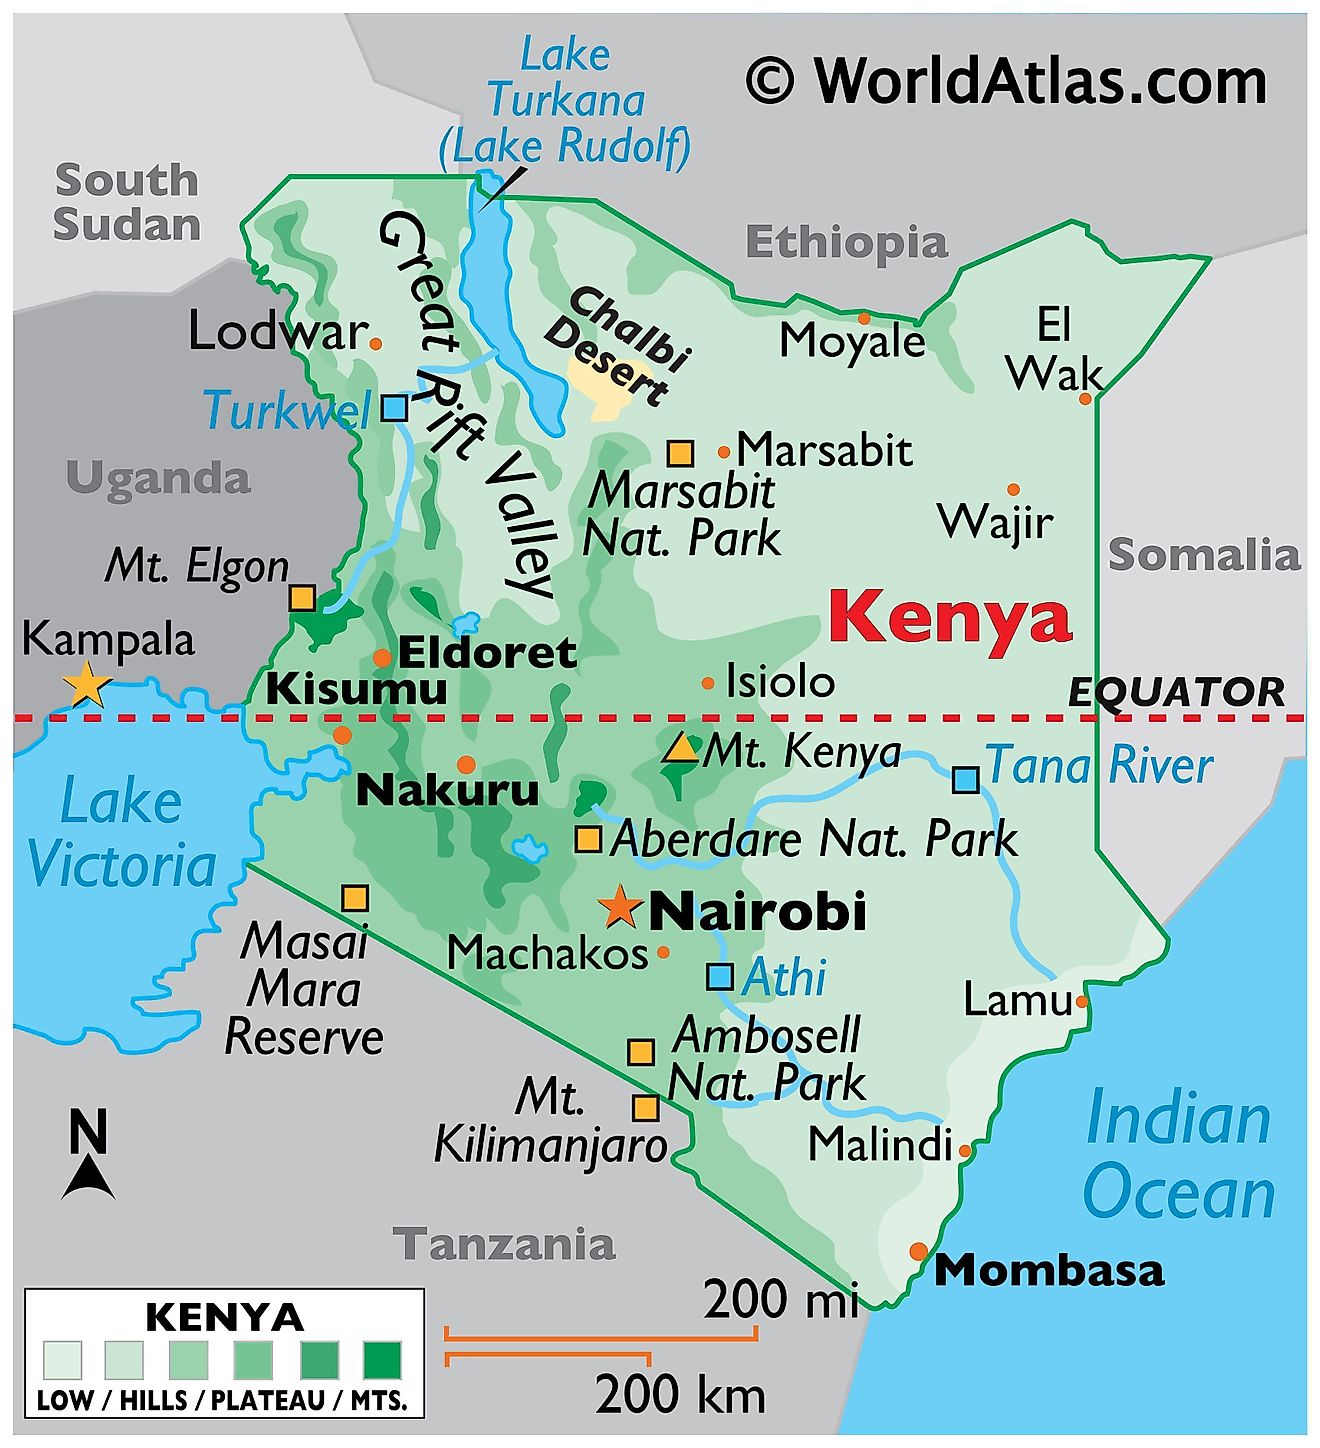 Physical Map of Kenya displaying state boundaries, relief, major rivers and lakes, Mount Kenya, the Great Rift Valley, major cities and national parks.